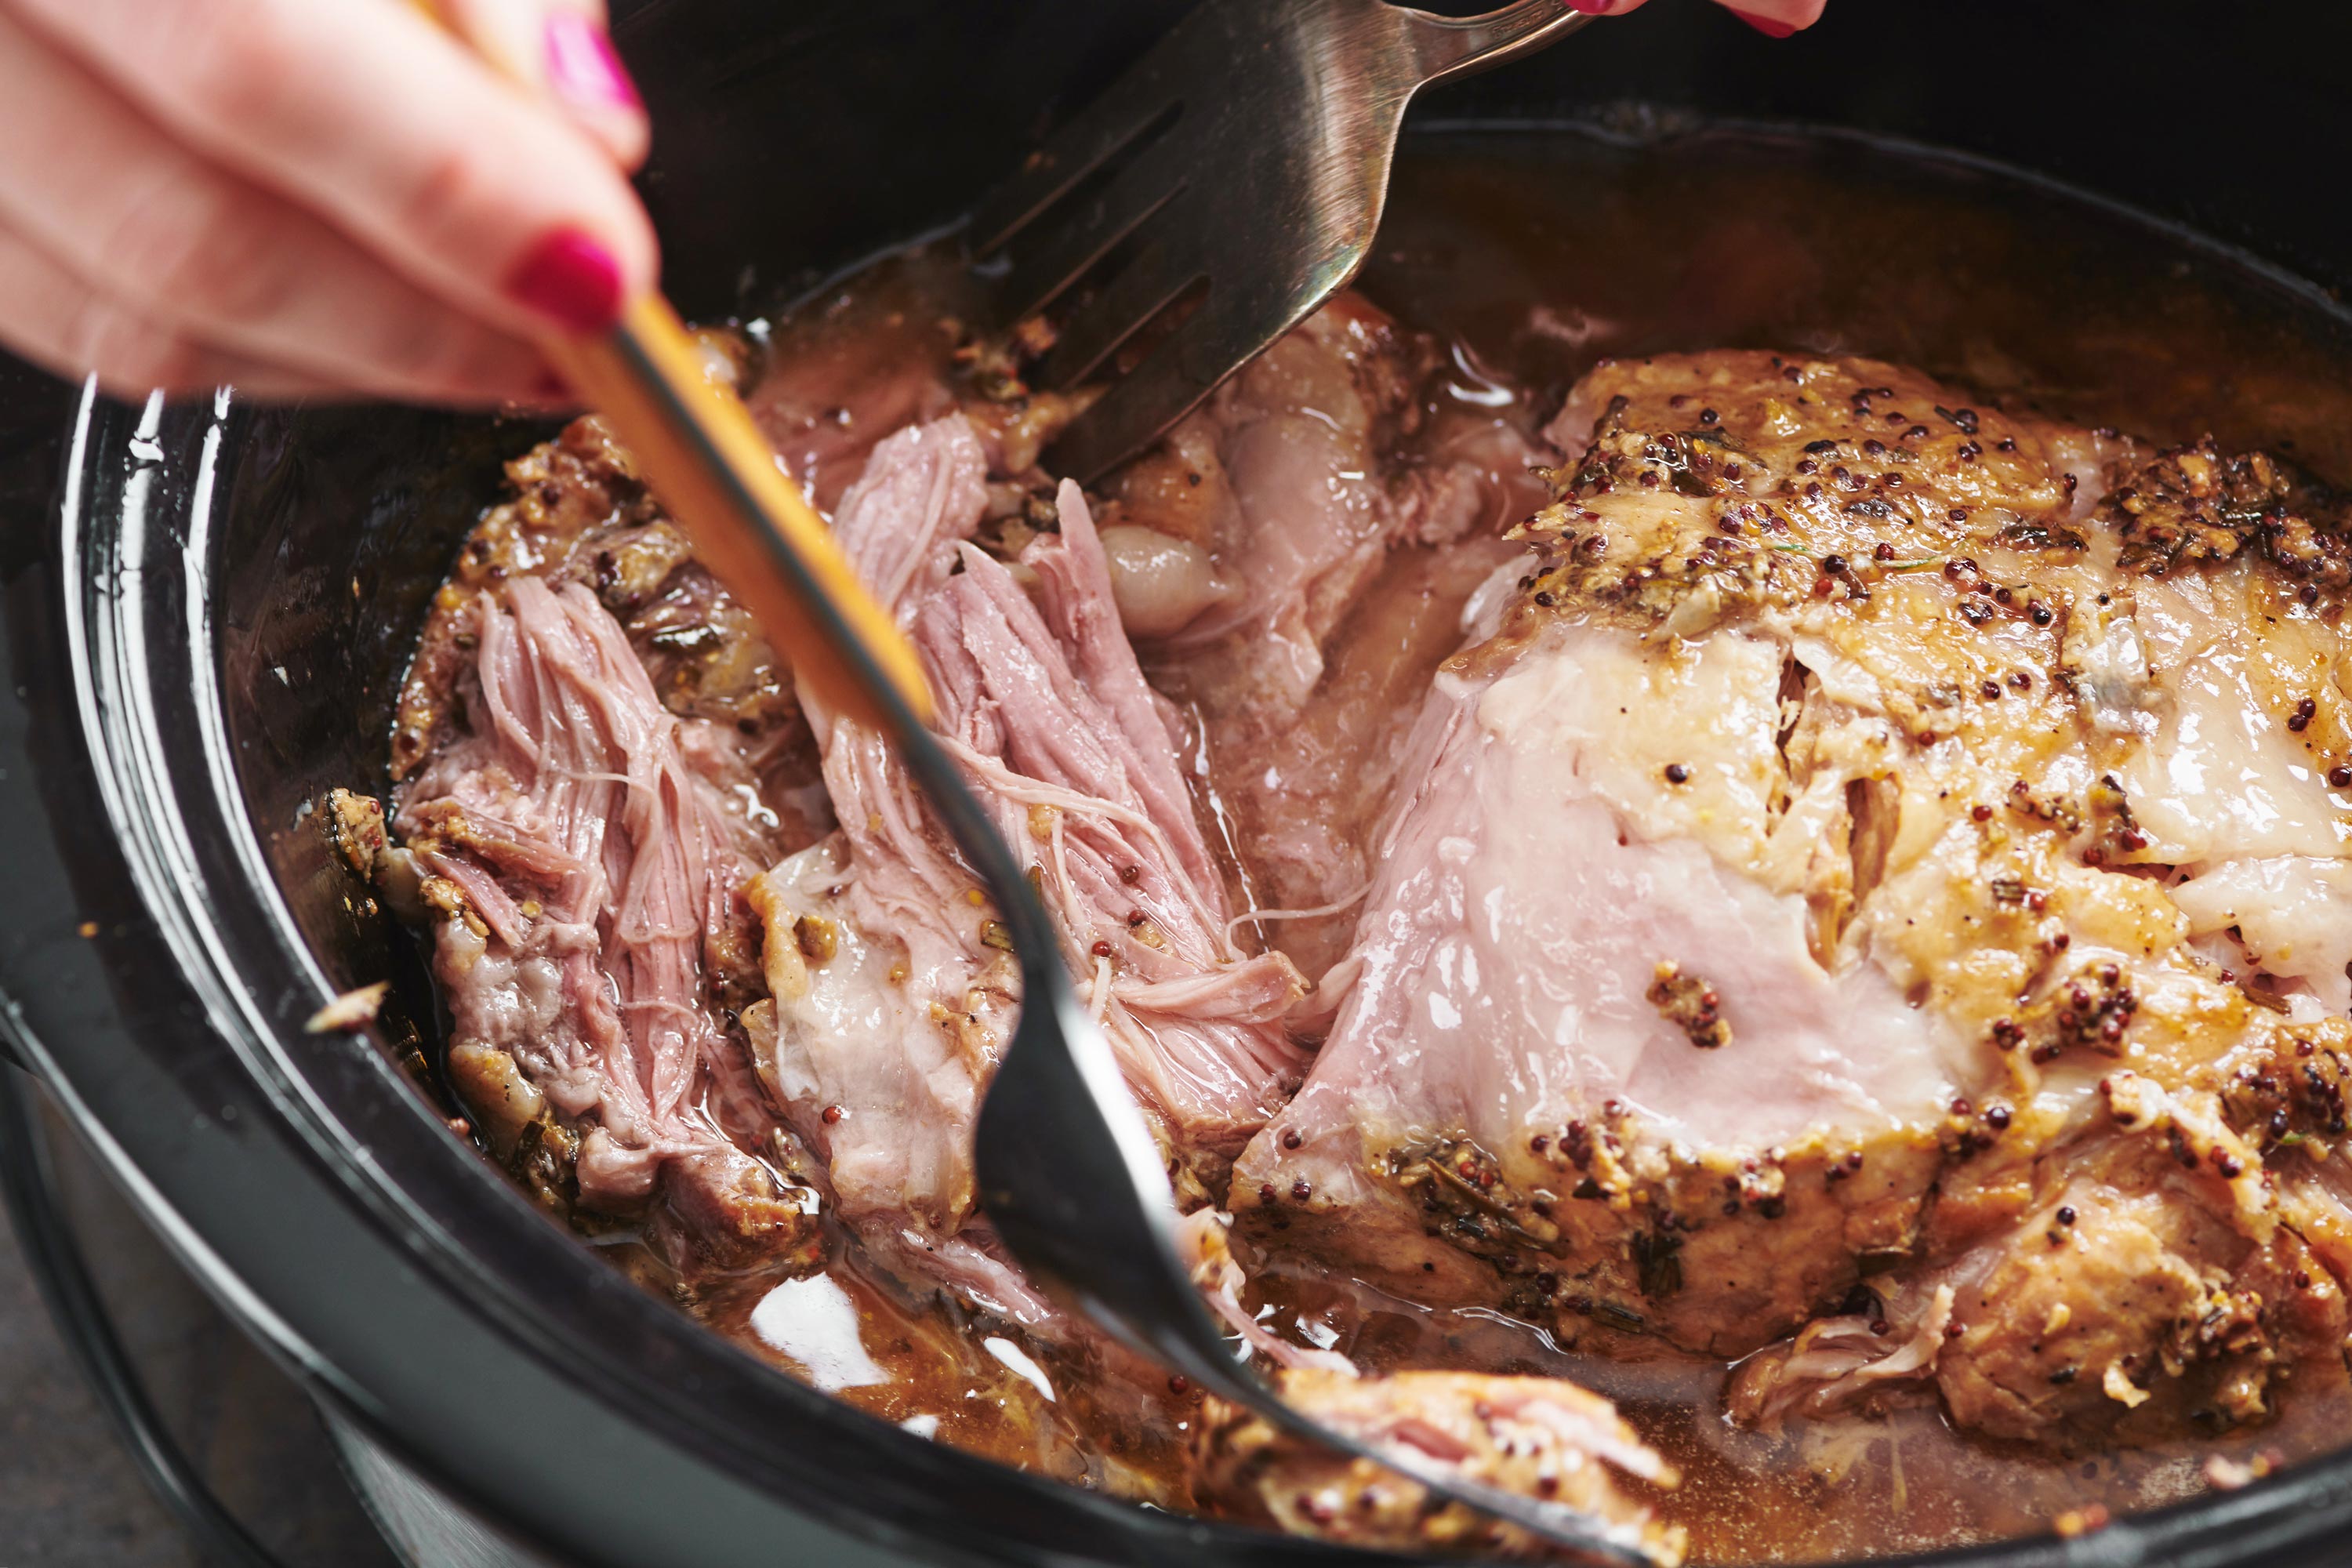 Slow Cooker Fall Apart Pork Butt With Brown Sugar Recipe,How To Make Candles